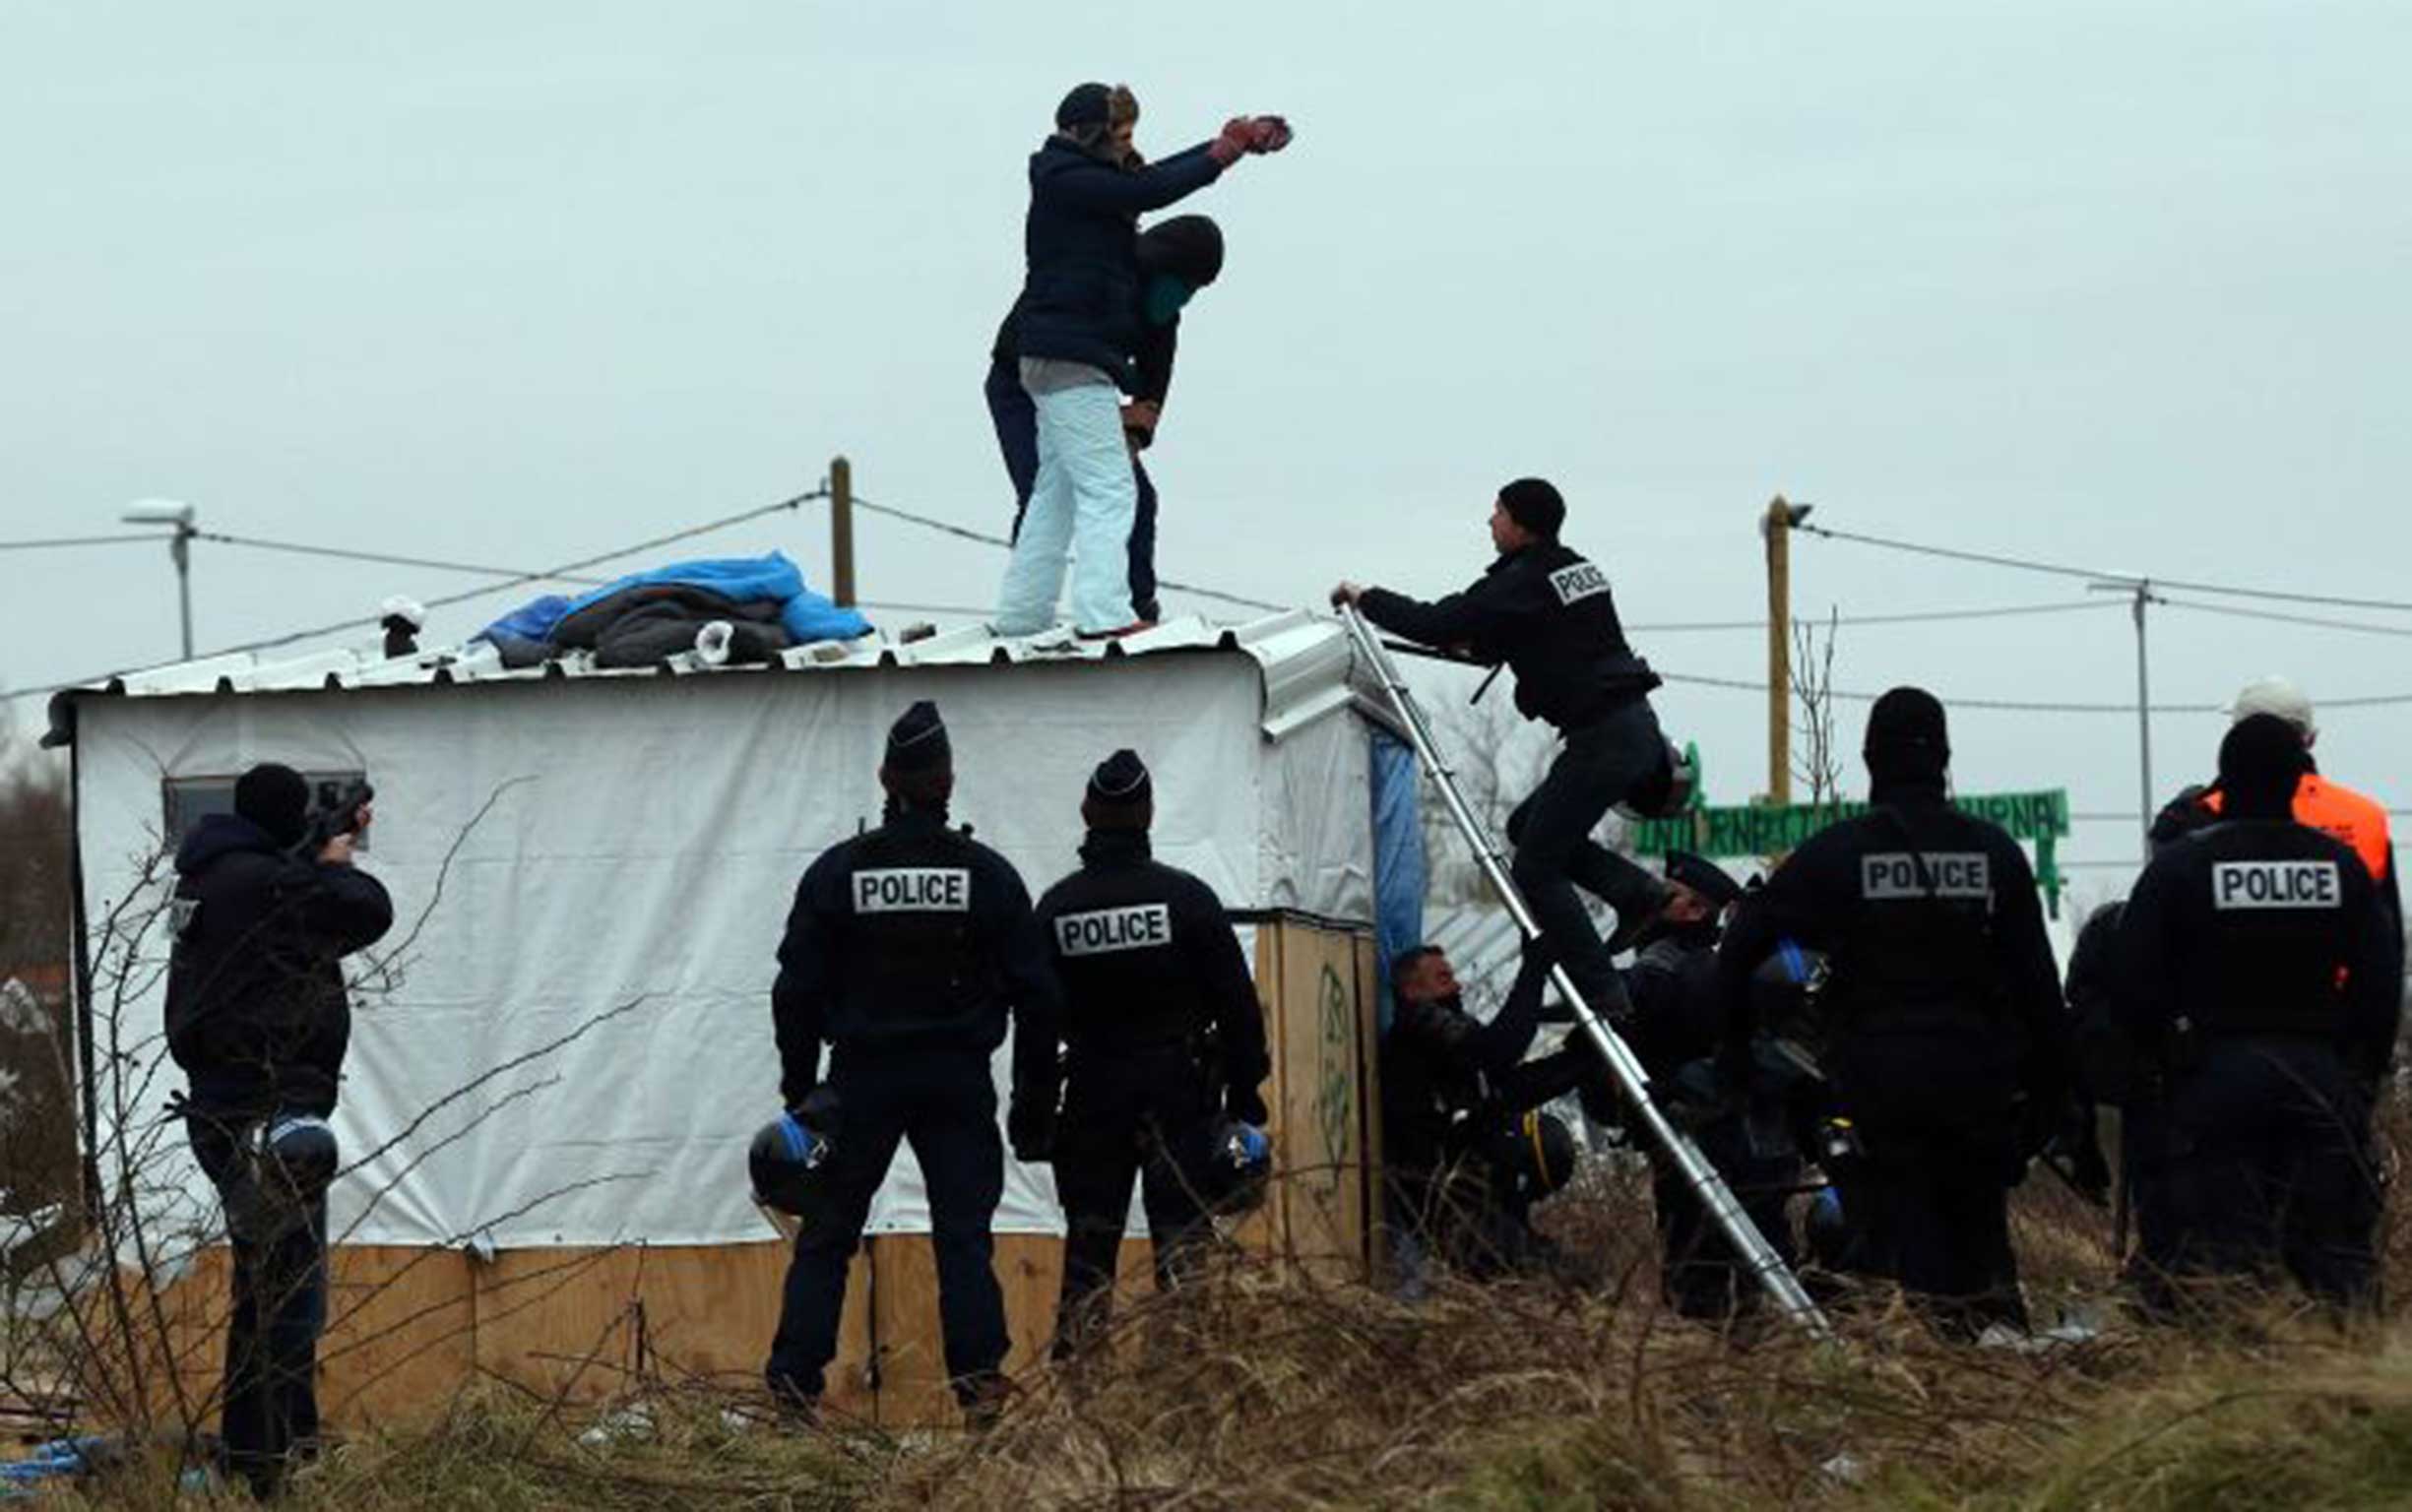 French police prepare to remove a woman, who threatened to cut her wrists, and a man from the top of a hut as they clear the Jungle camp in Calais. Both were arrested